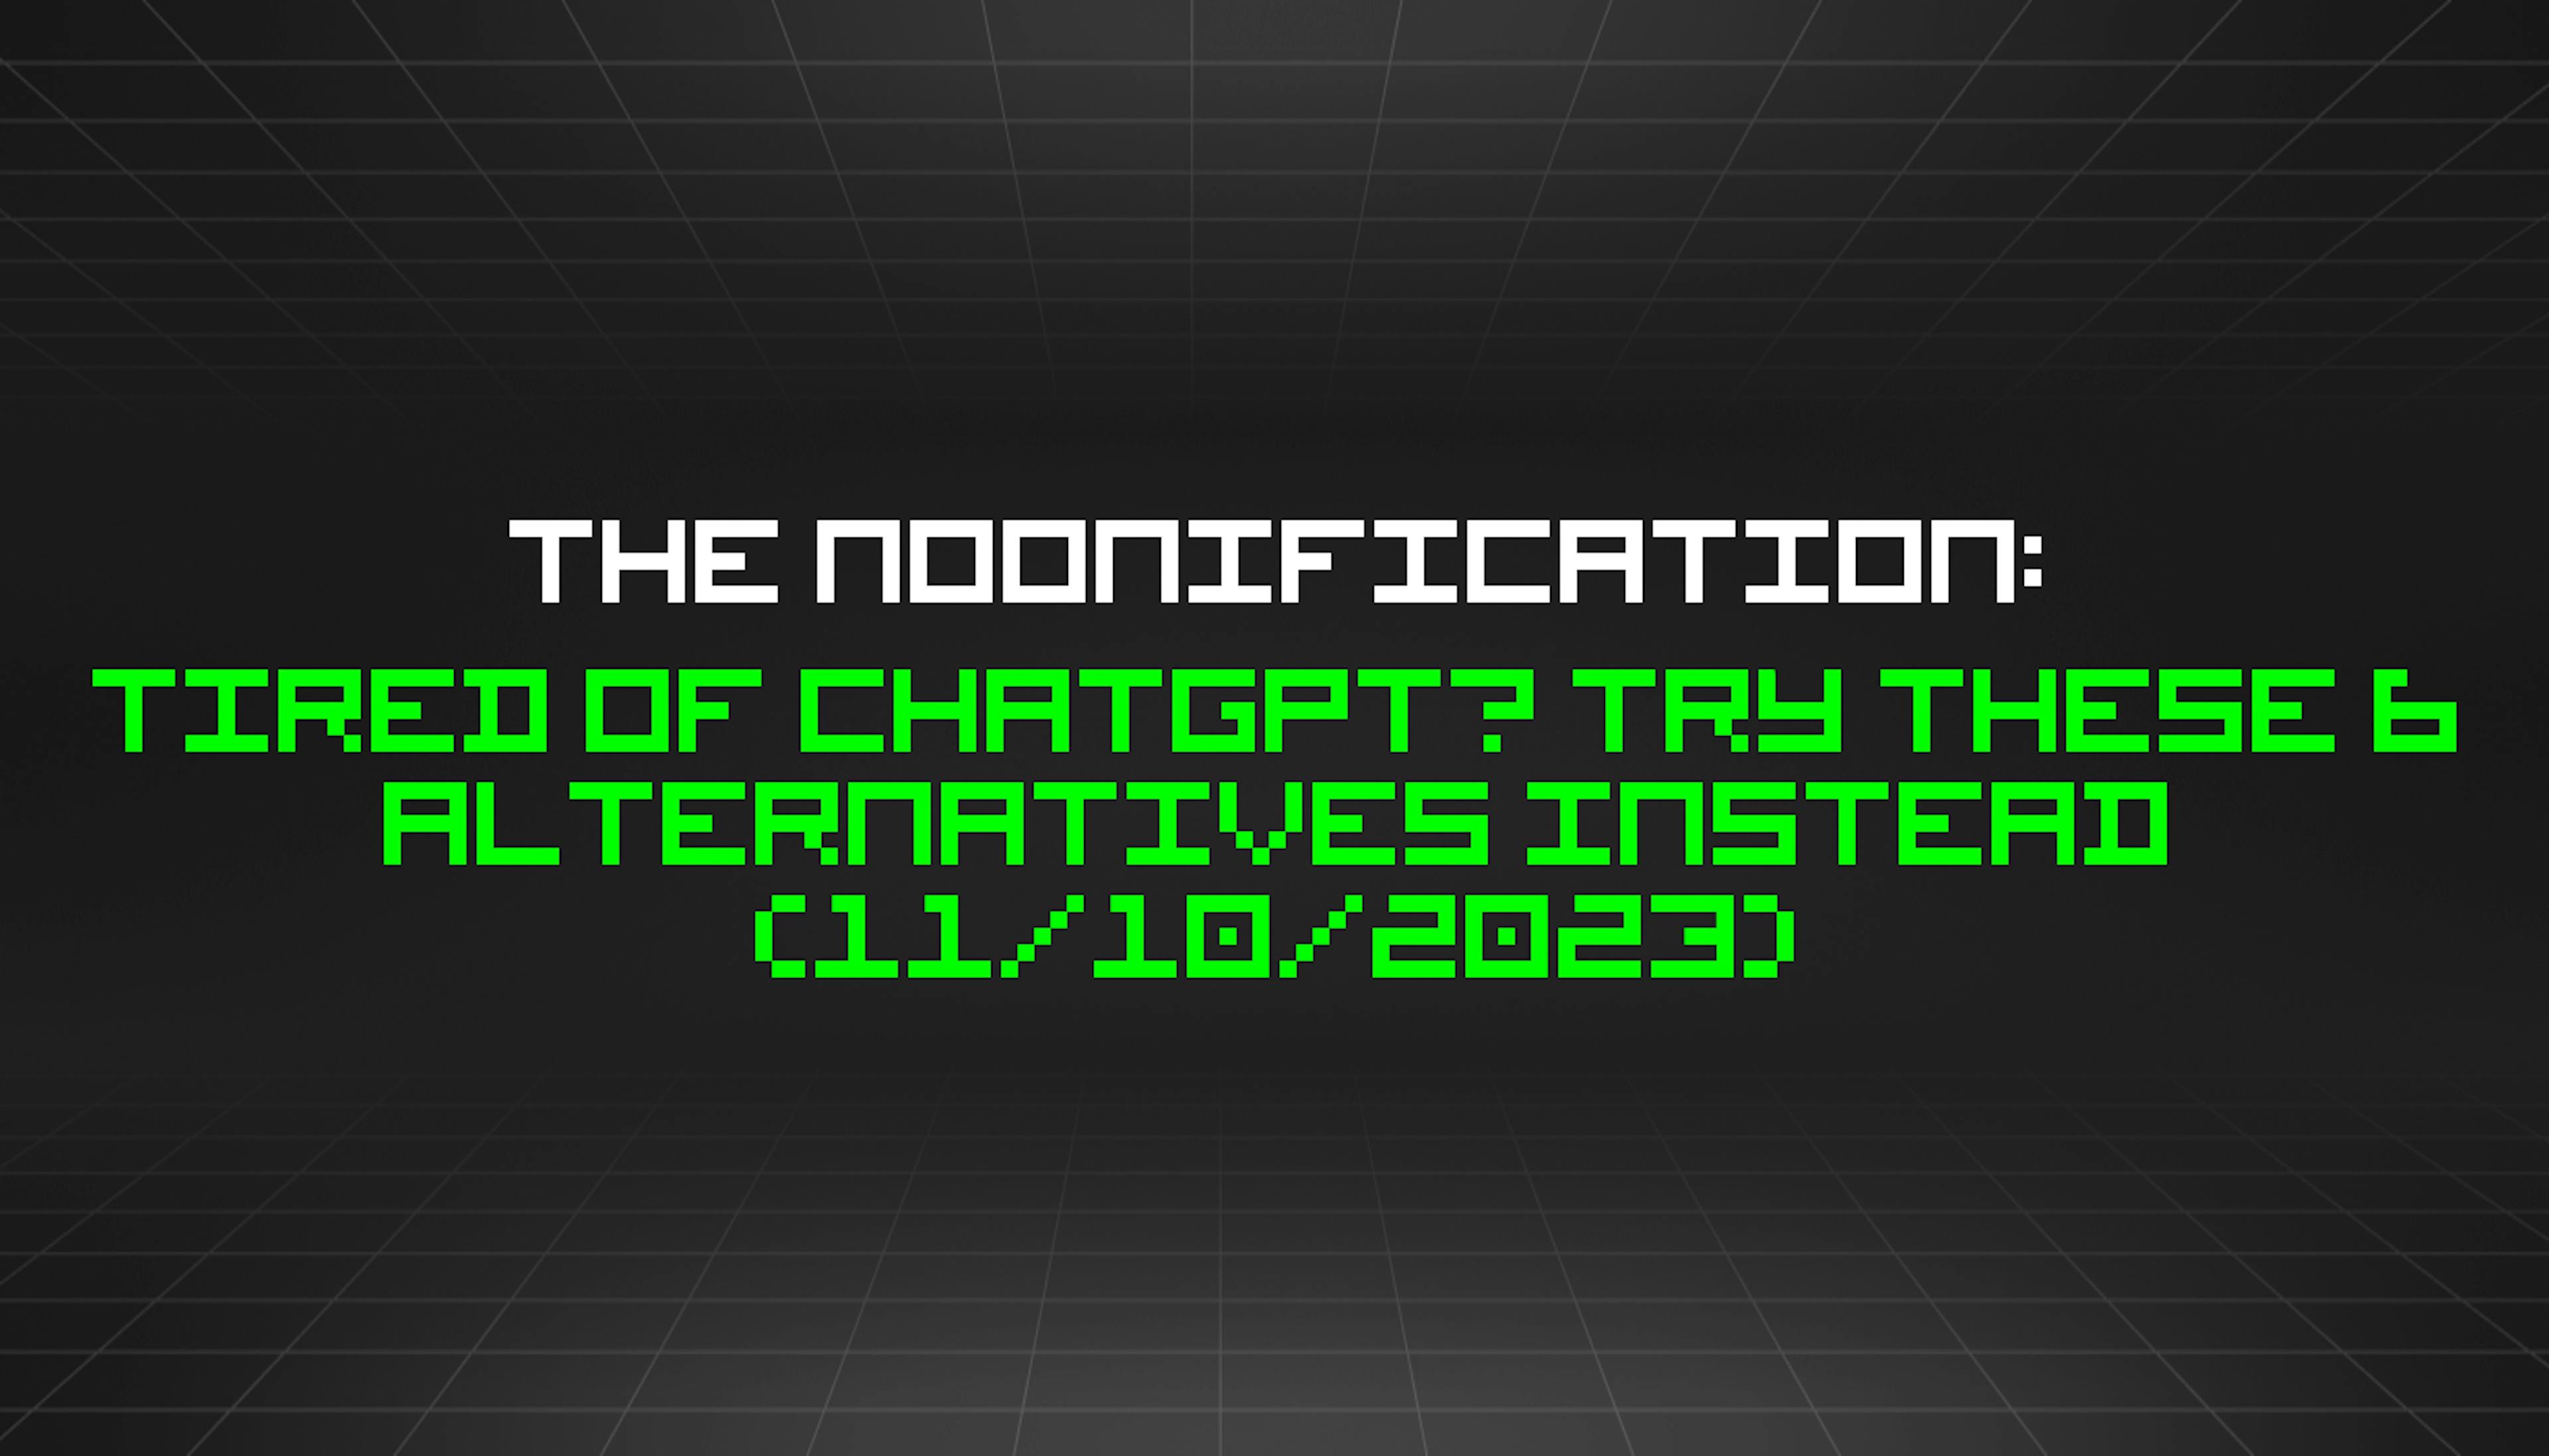 featured image - The Noonification: Tired of ChatGPT? Try These 6 Alternatives Instead (11/10/2023)